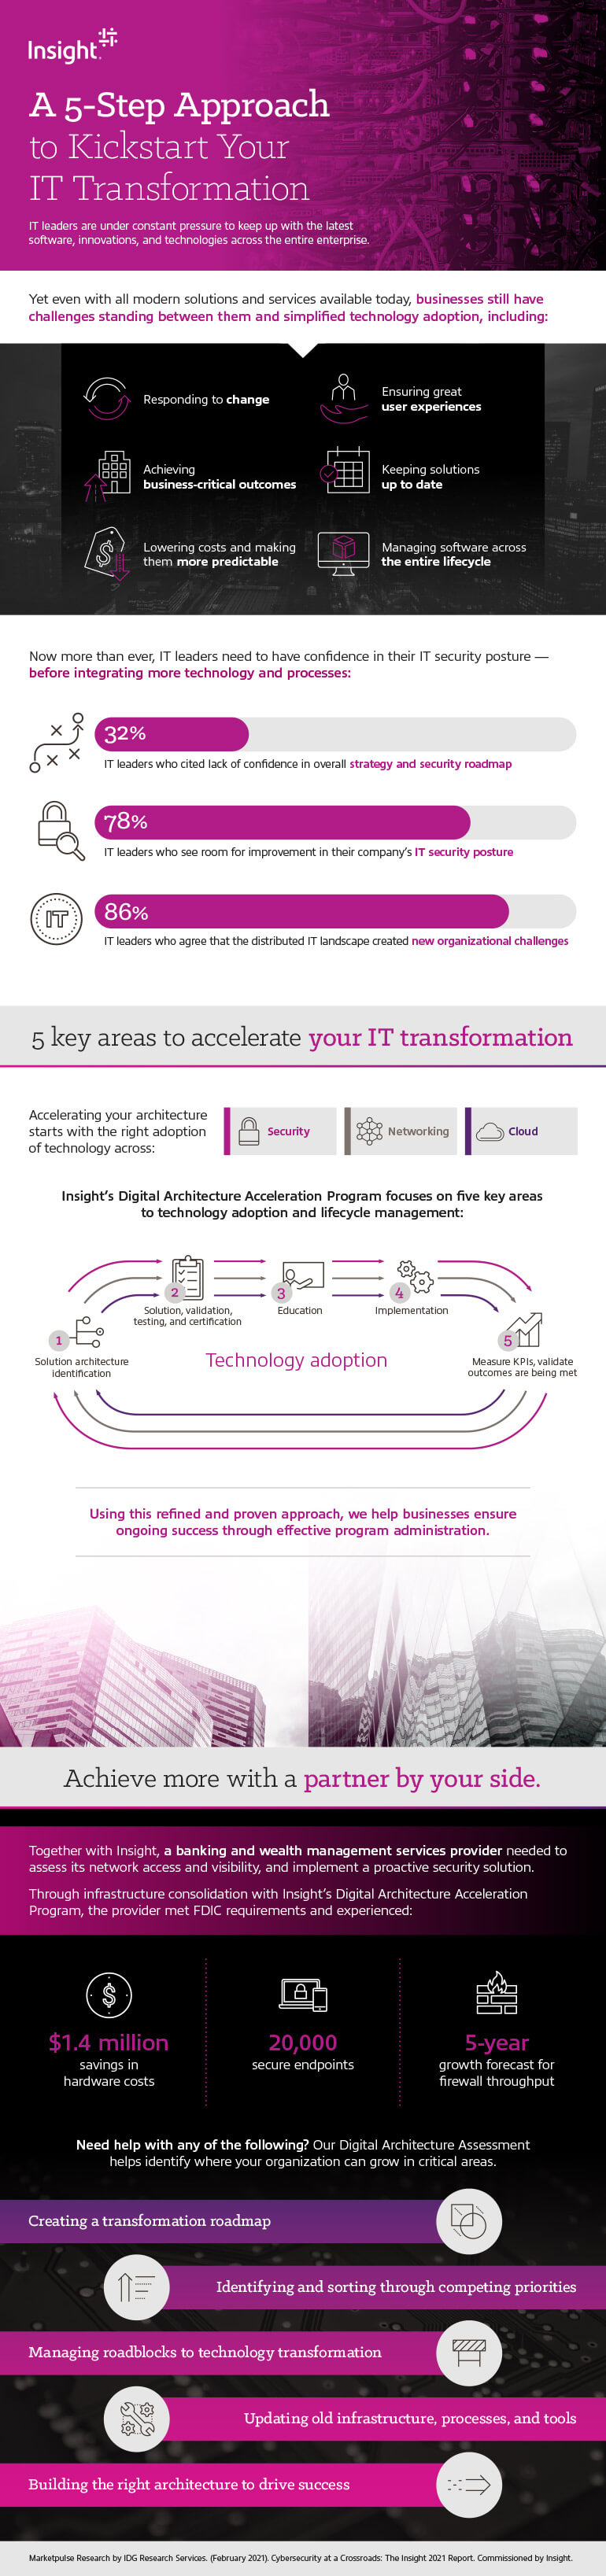 A 5-Step Approach to Kickstart Your IT Transformation infographic